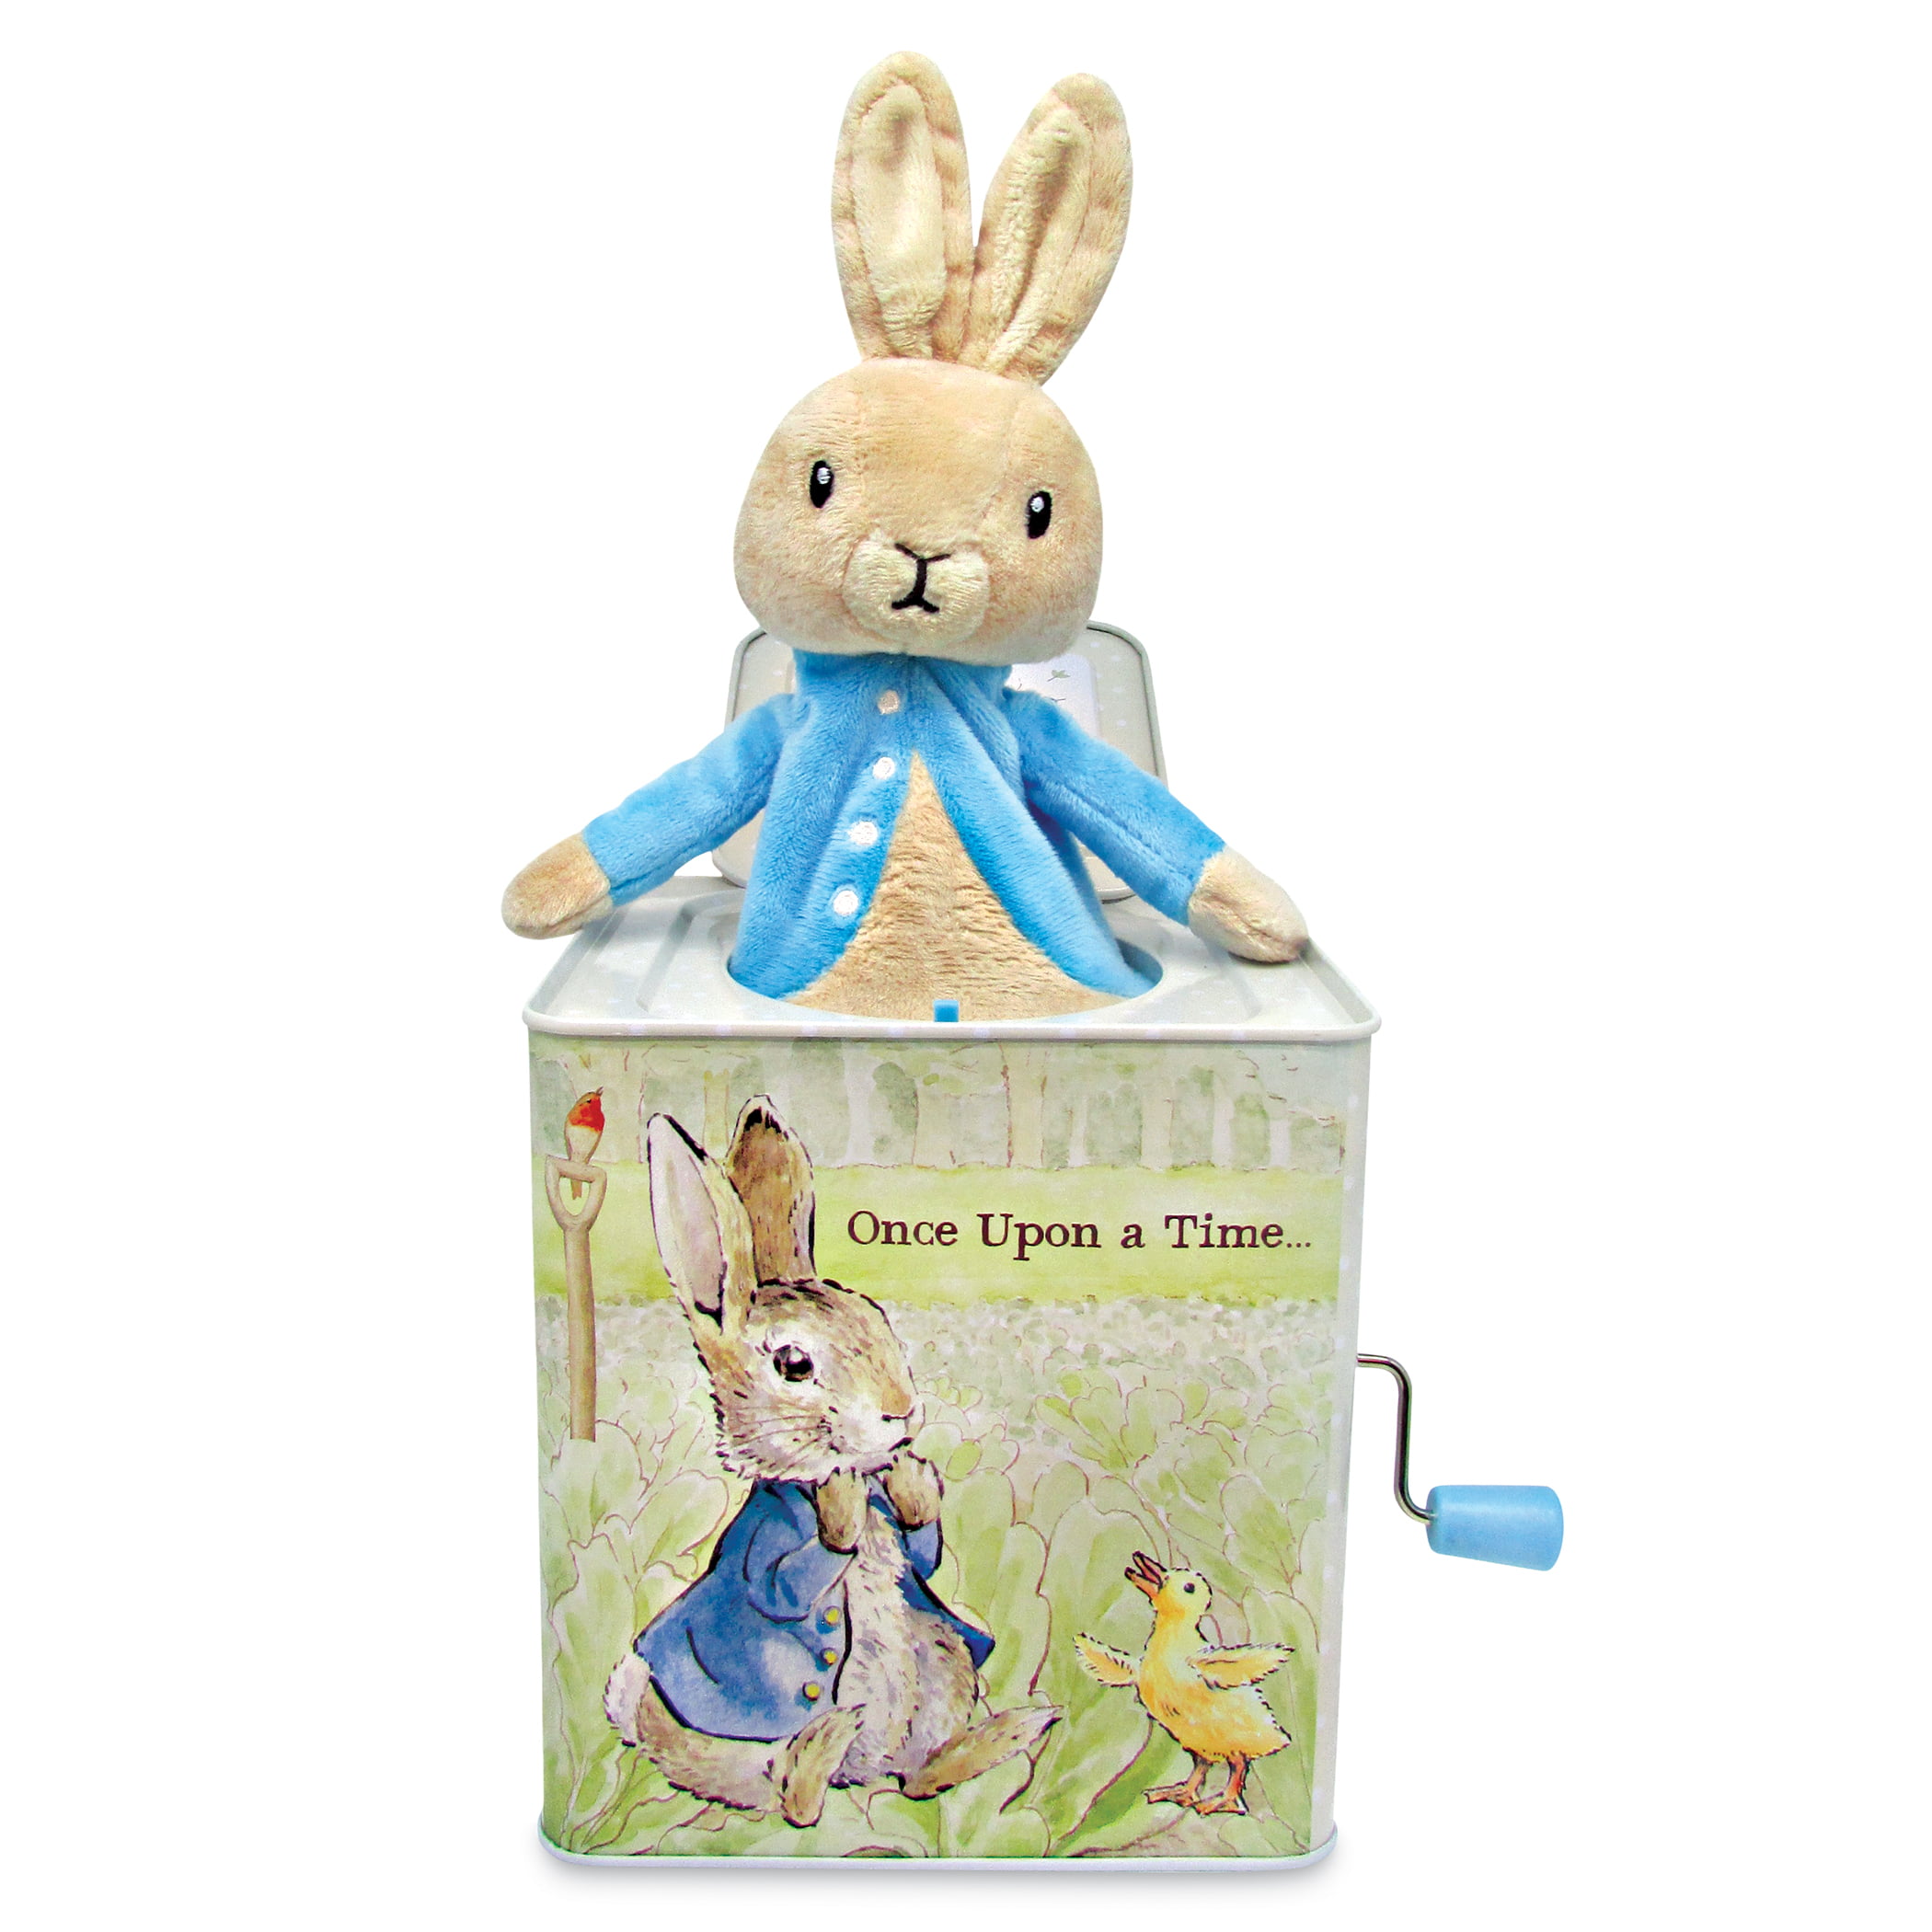 Hot Cute Peter Rabbit Beatrix Potter Plush Toys Collection For Kids Gifts Lovely 